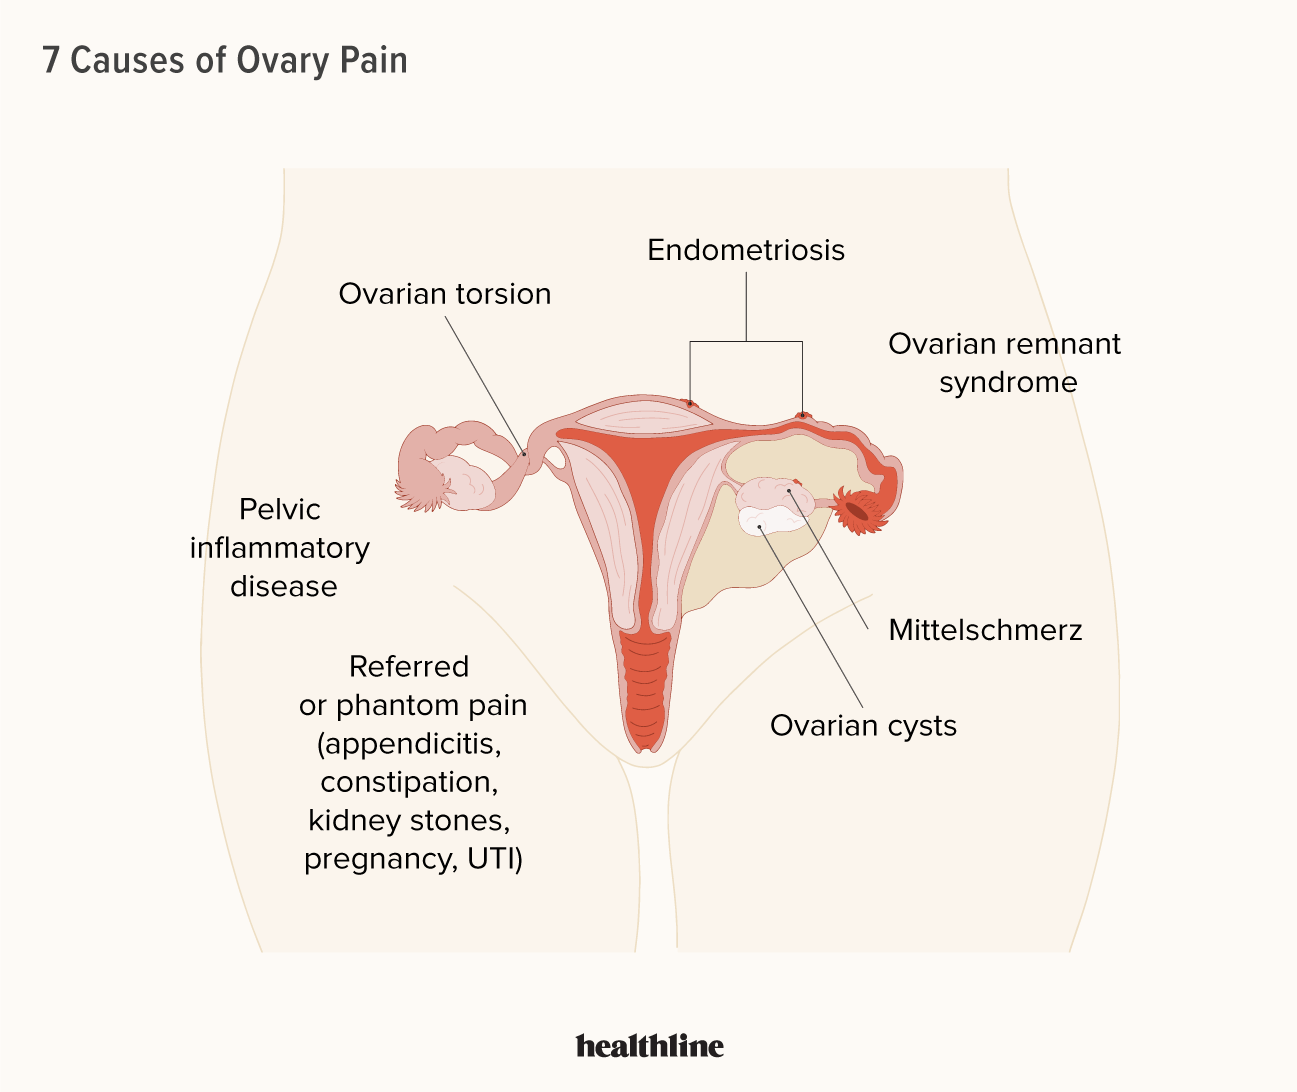 What are the symptoms of an ovarian cyst bursting, and is it